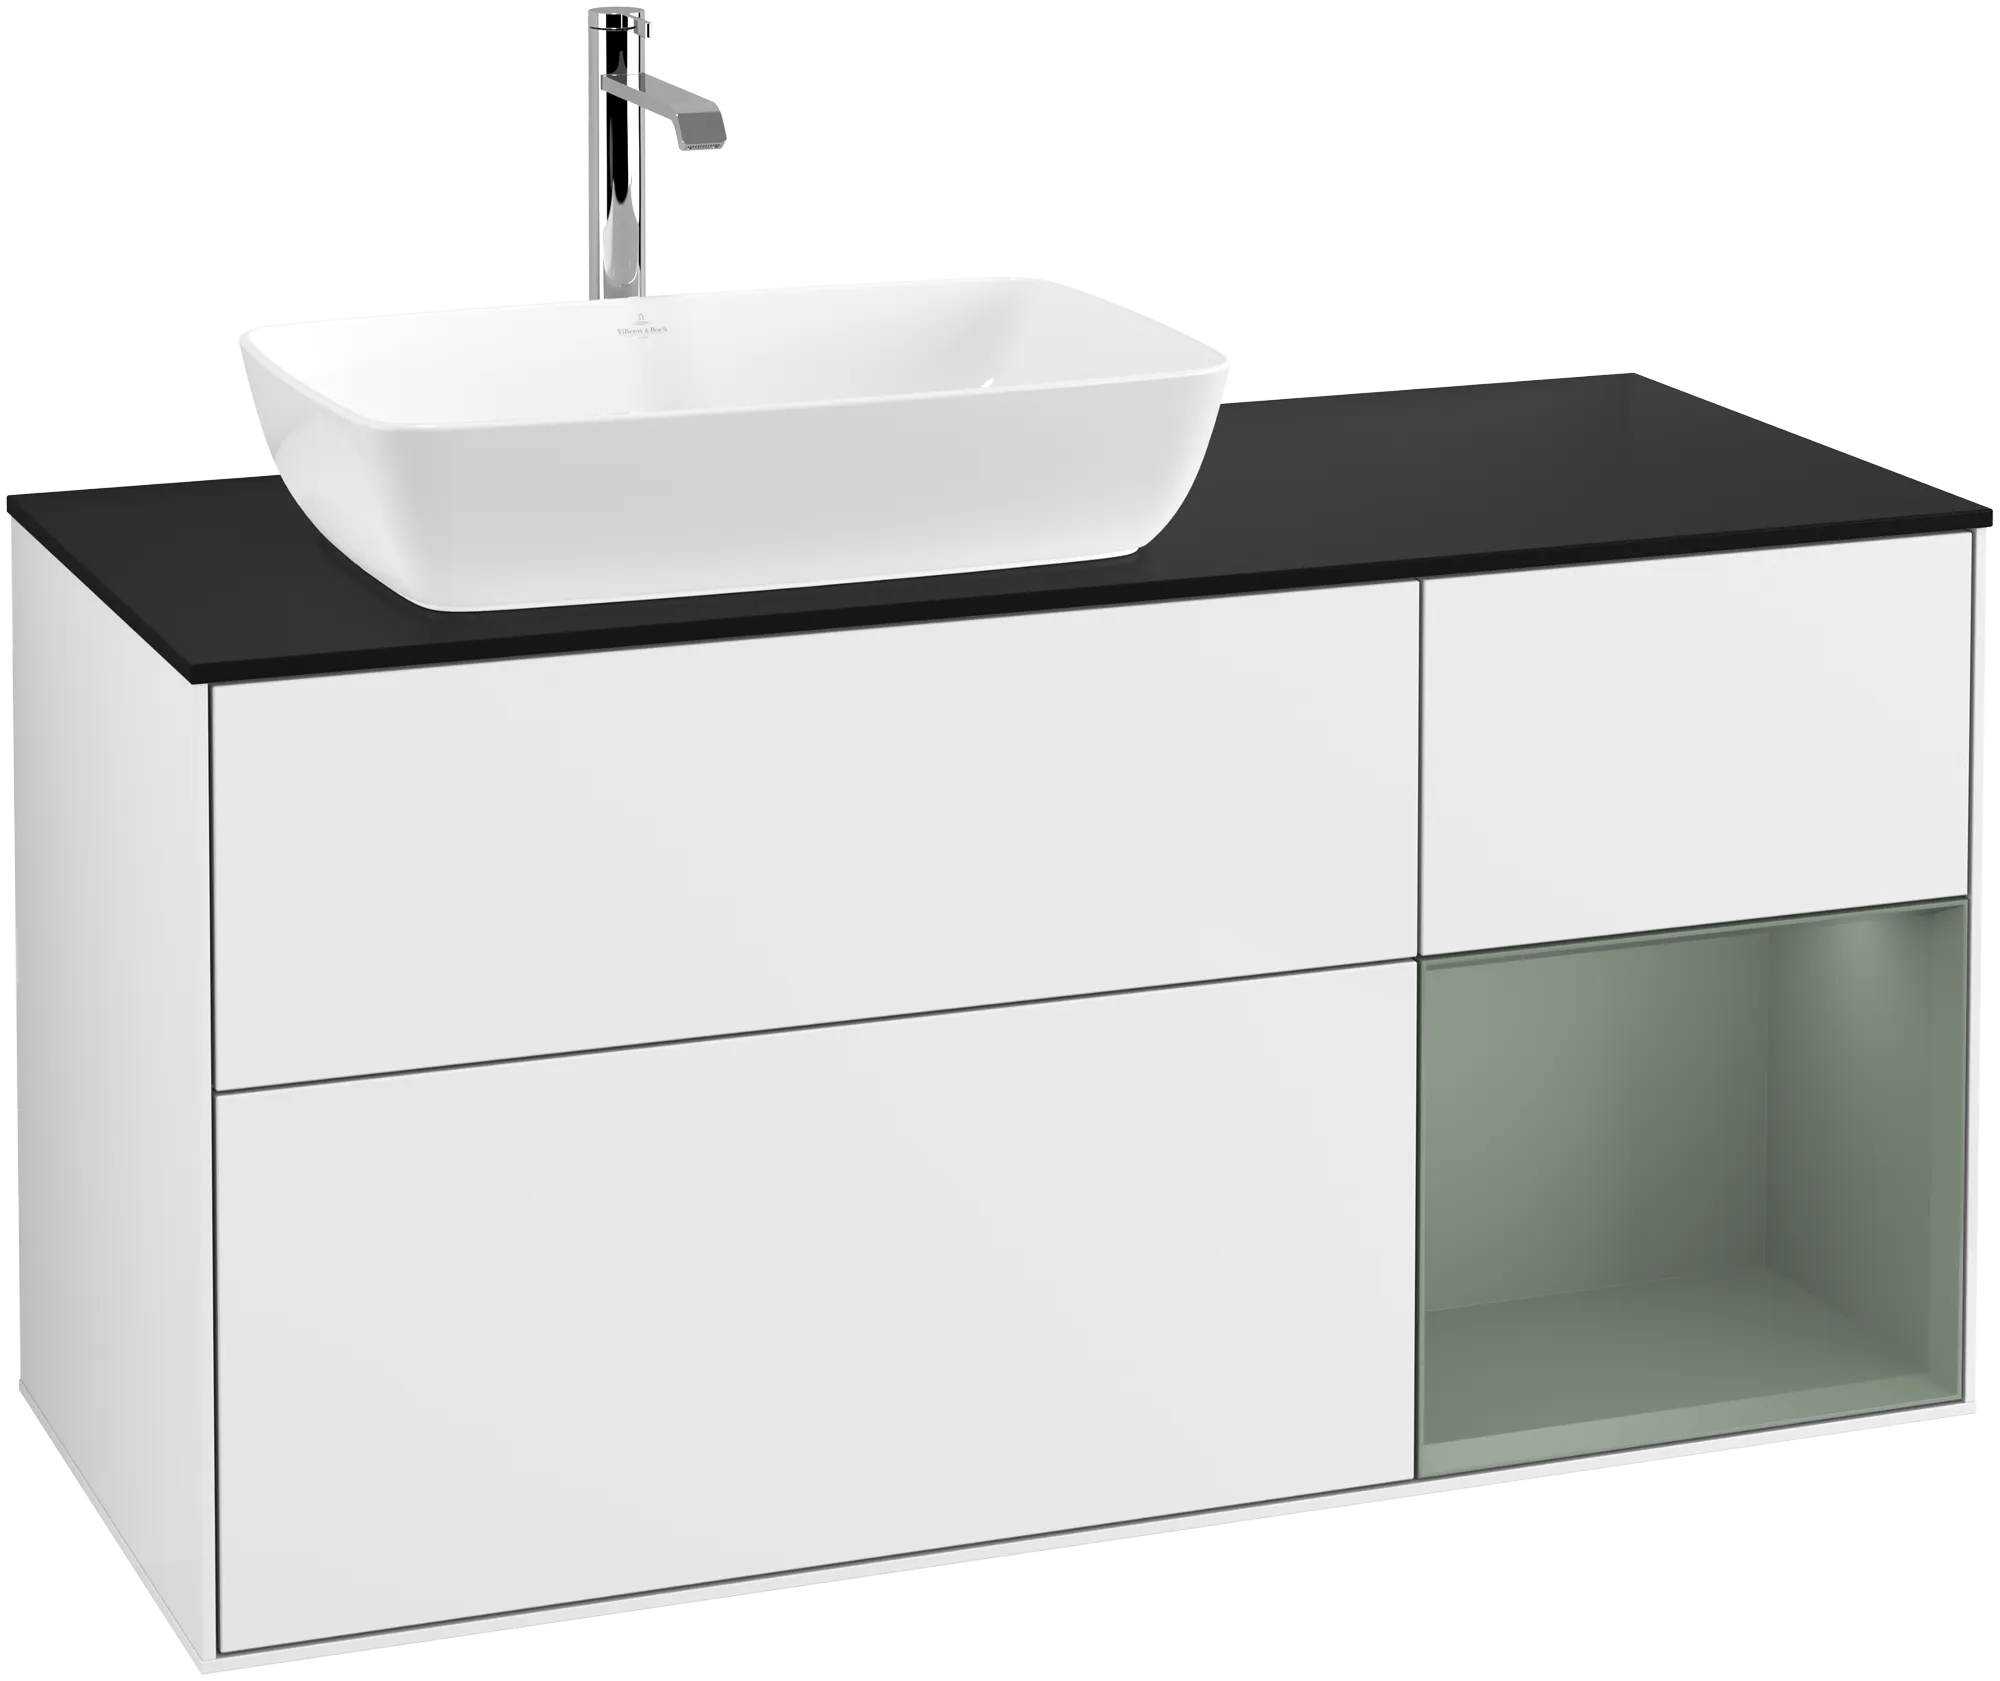 Obrázek VILLEROY BOCH Finion Vanity unit, with lighting, 3 pull-out compartments, 1200 x 603 x 501 mm, Glossy White Lacquer / Olive Matt Lacquer / Glass Black Matt #G812GMGF